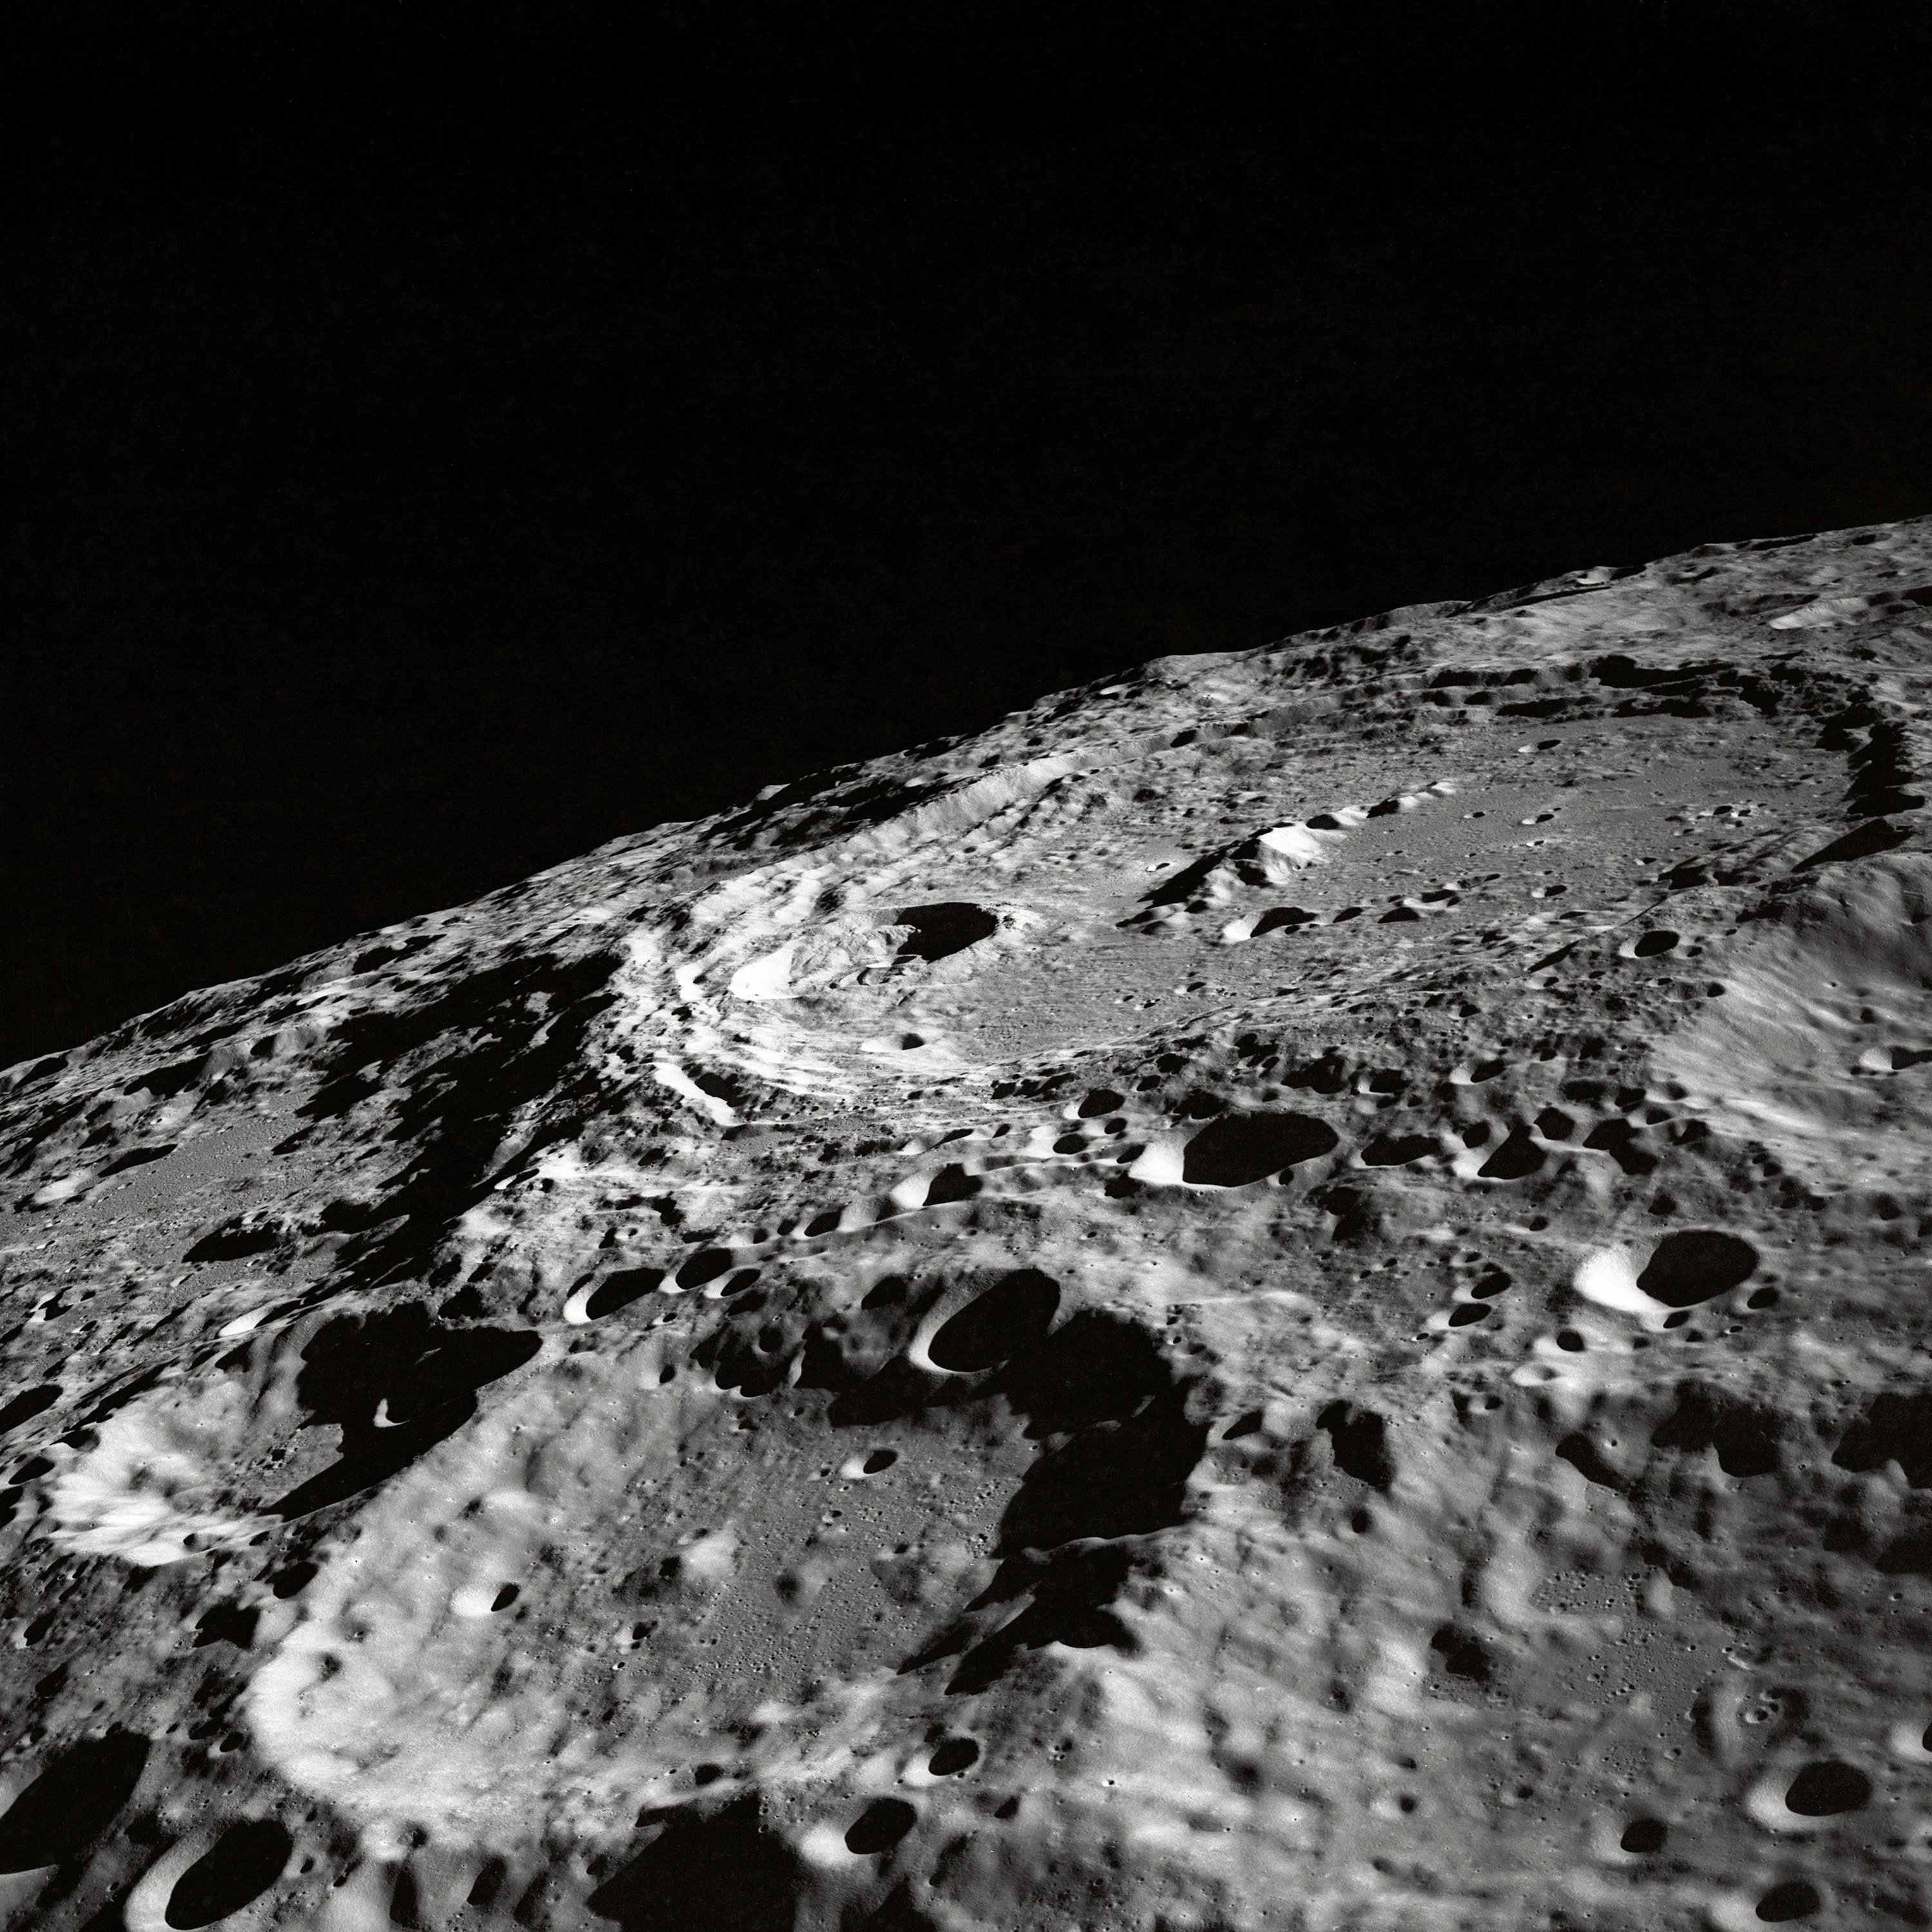 Surface from the Lunar surface captured by NASA mission